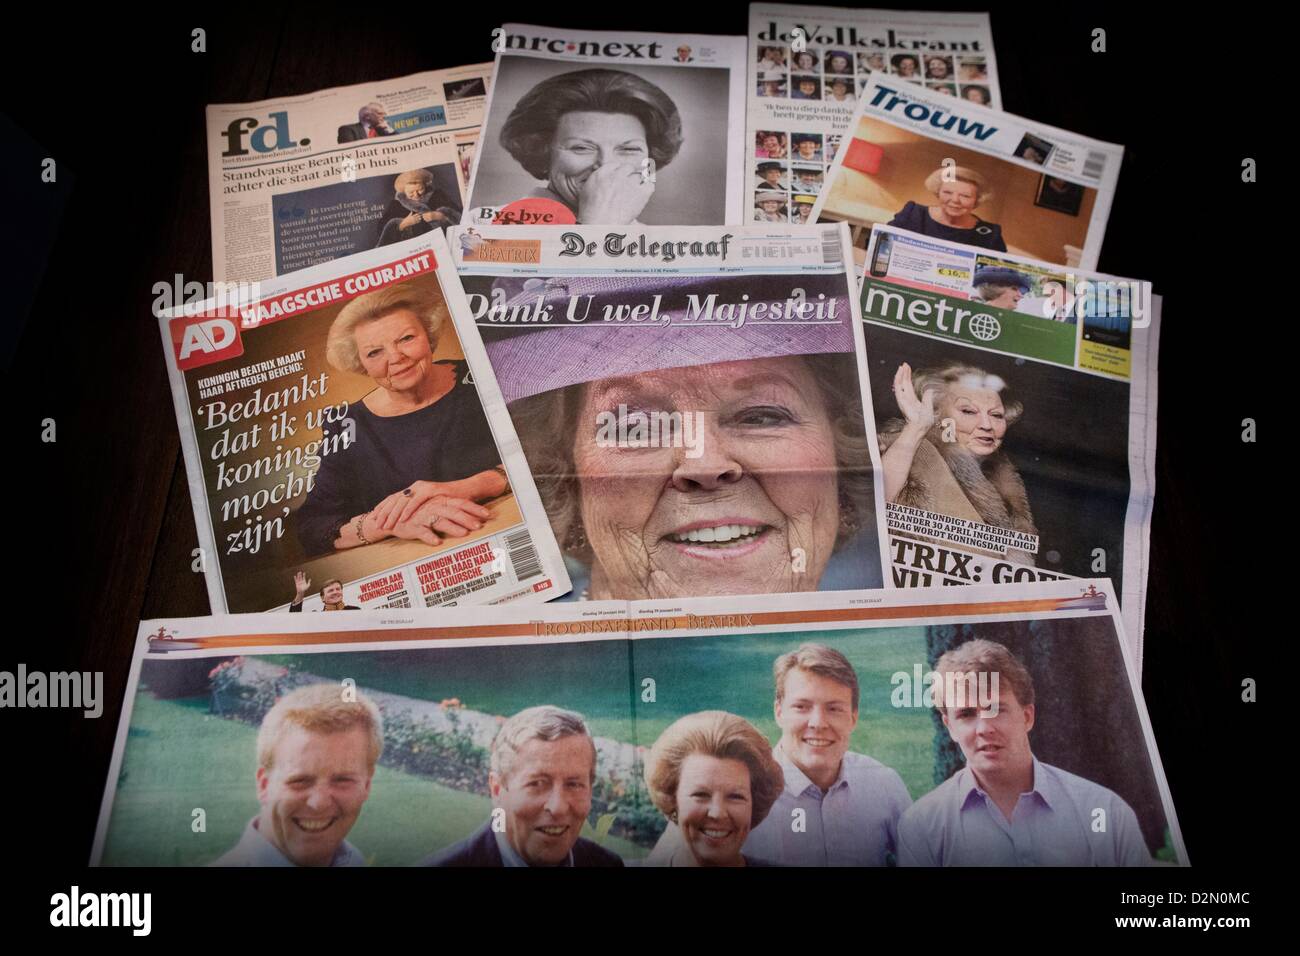 Netherlands, 29th January 2013. Dutch newspapers the morning after the abdication announcement of Queen Beatrix of The Netherlands, pictured 29 January 2013. Photo: Patrick van Katwijk / Alamy Live News Stock Photo